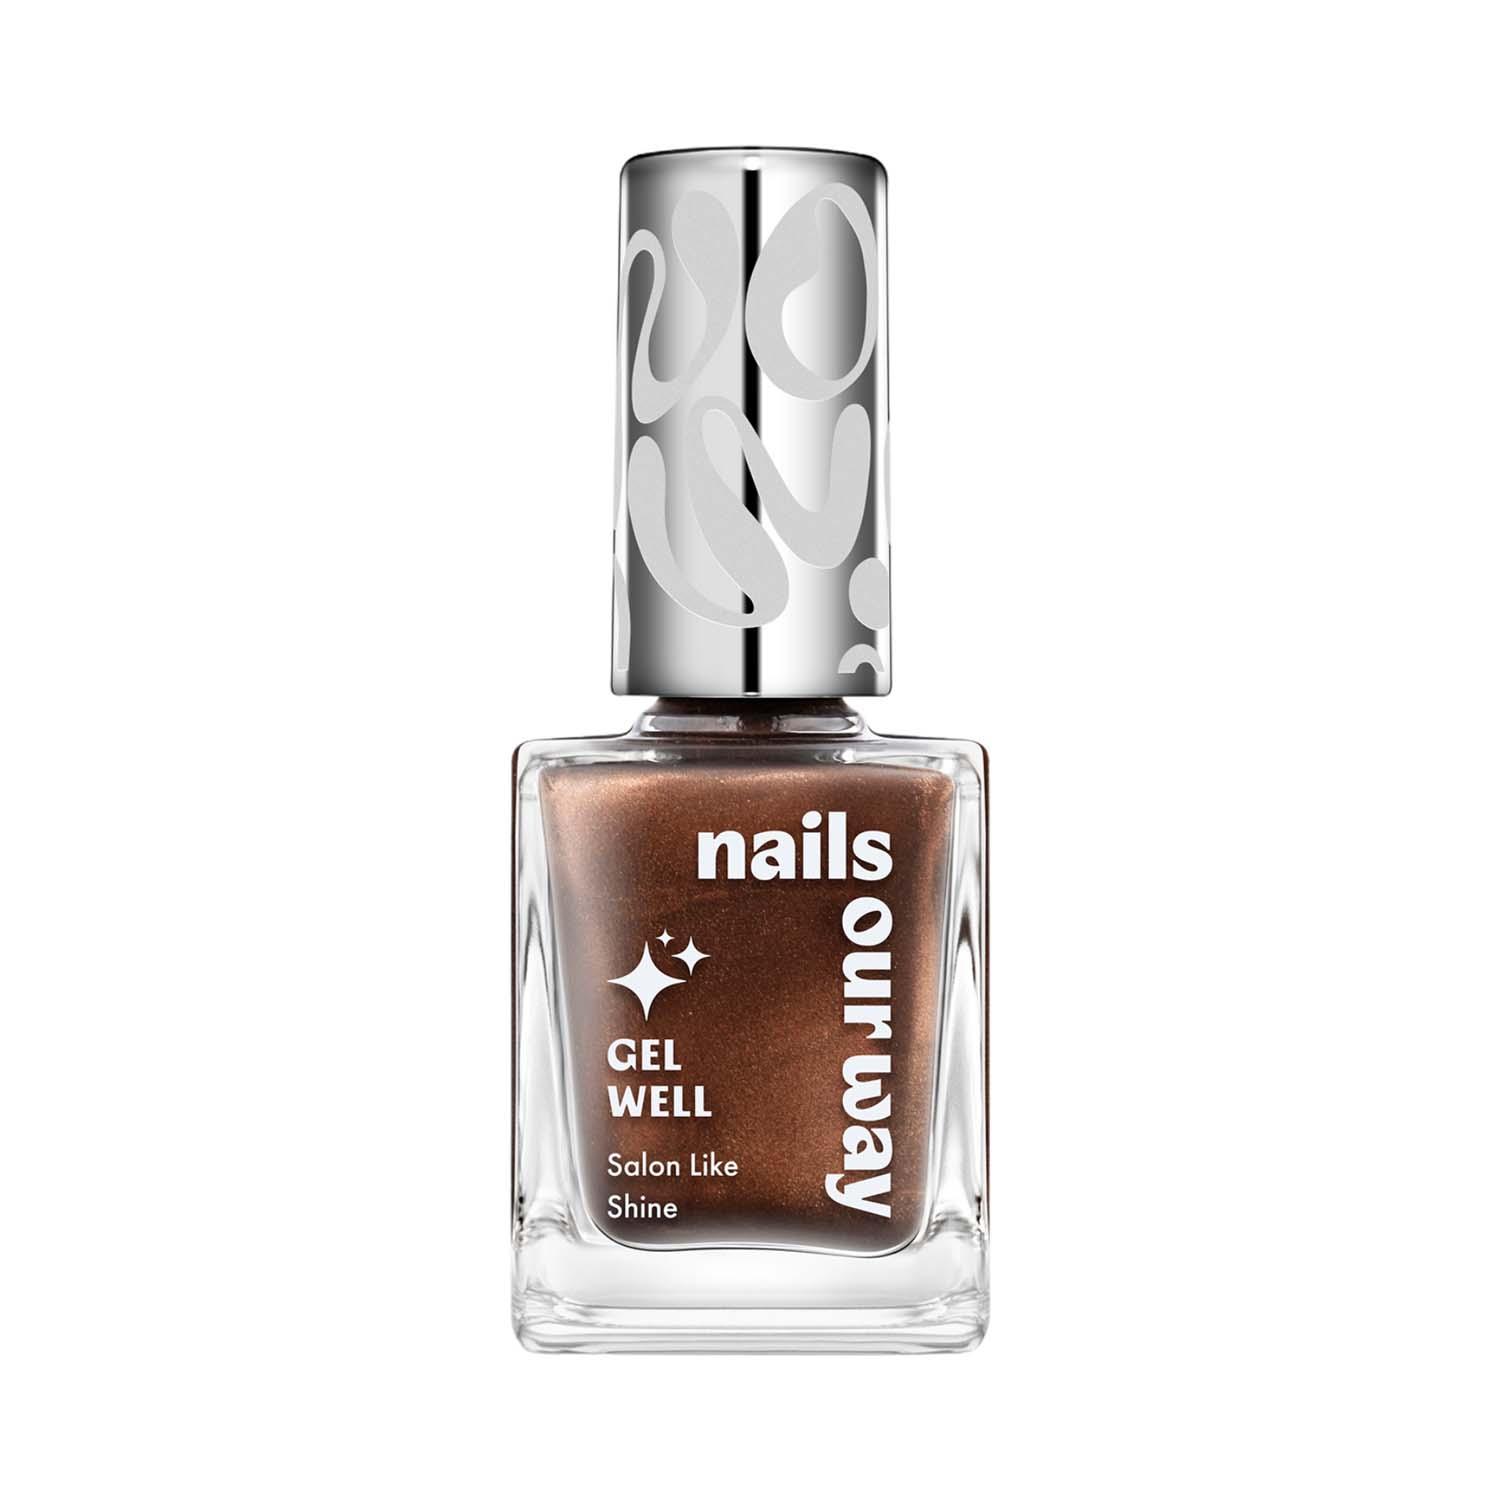 Nails Our Way | Nails Our Way Gel Well Nail Enamel - 504 Exuberant (10 ml)